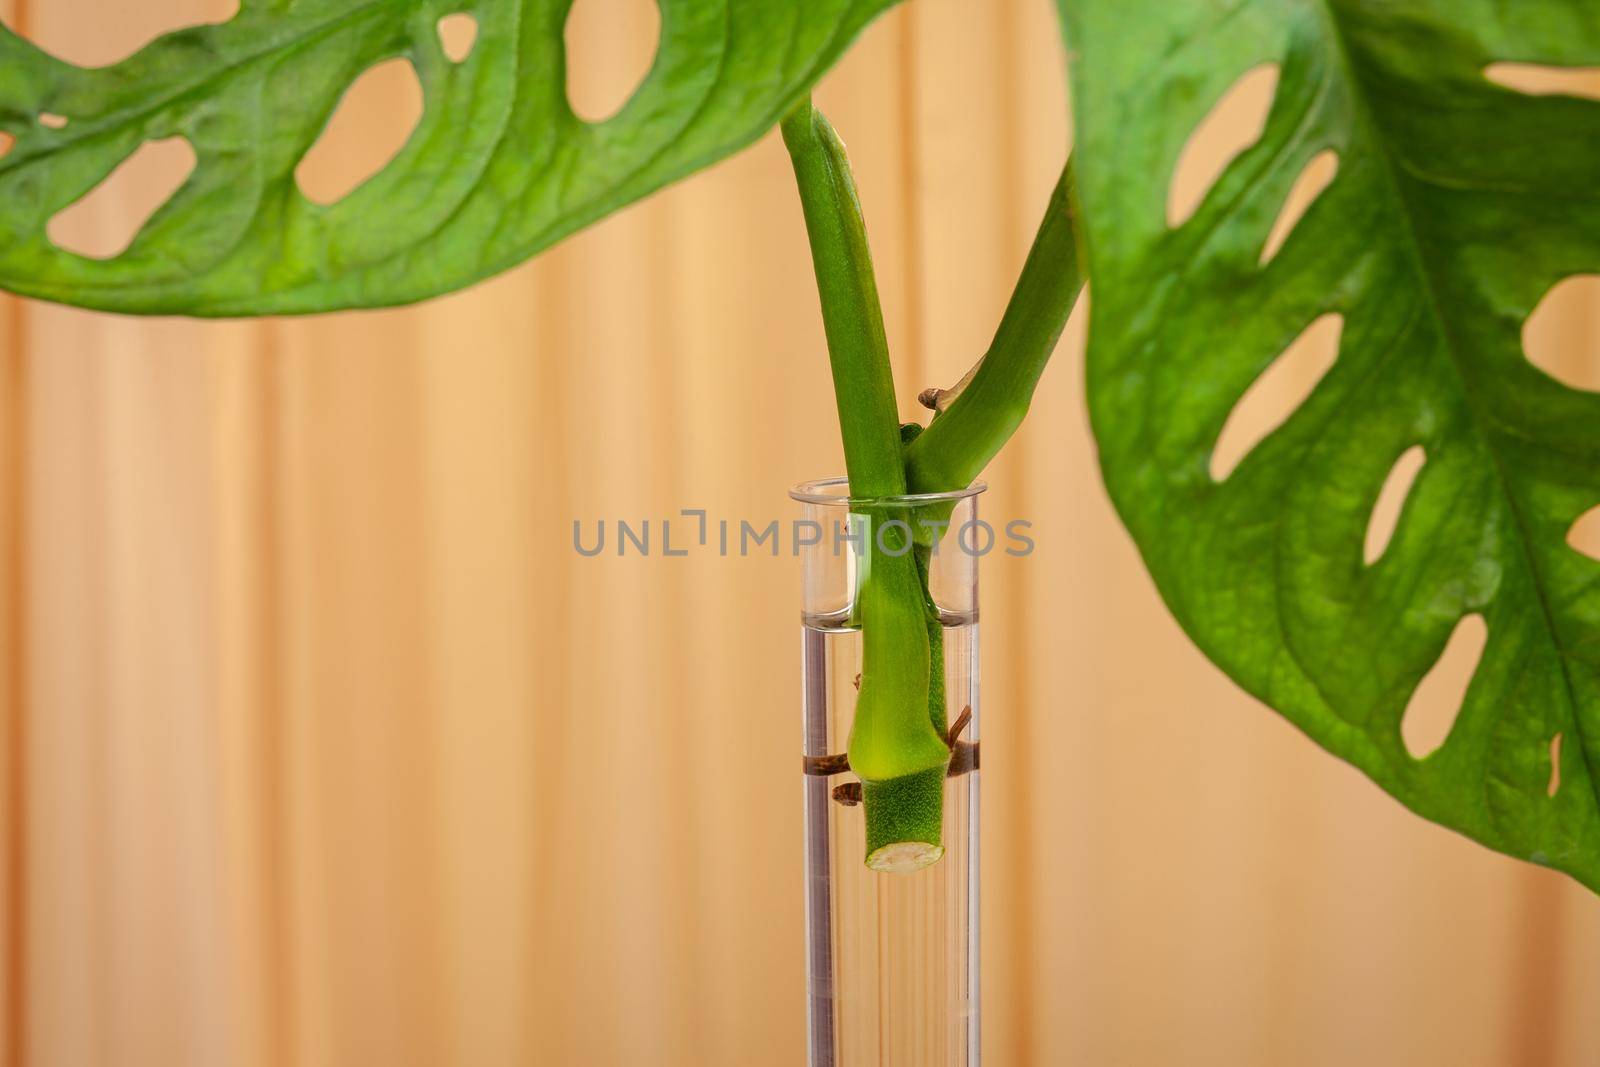 Monstera Monkey Mask or Swiss Cheese Vine, or Andansonii indoor plant being propagated in a glass tube.